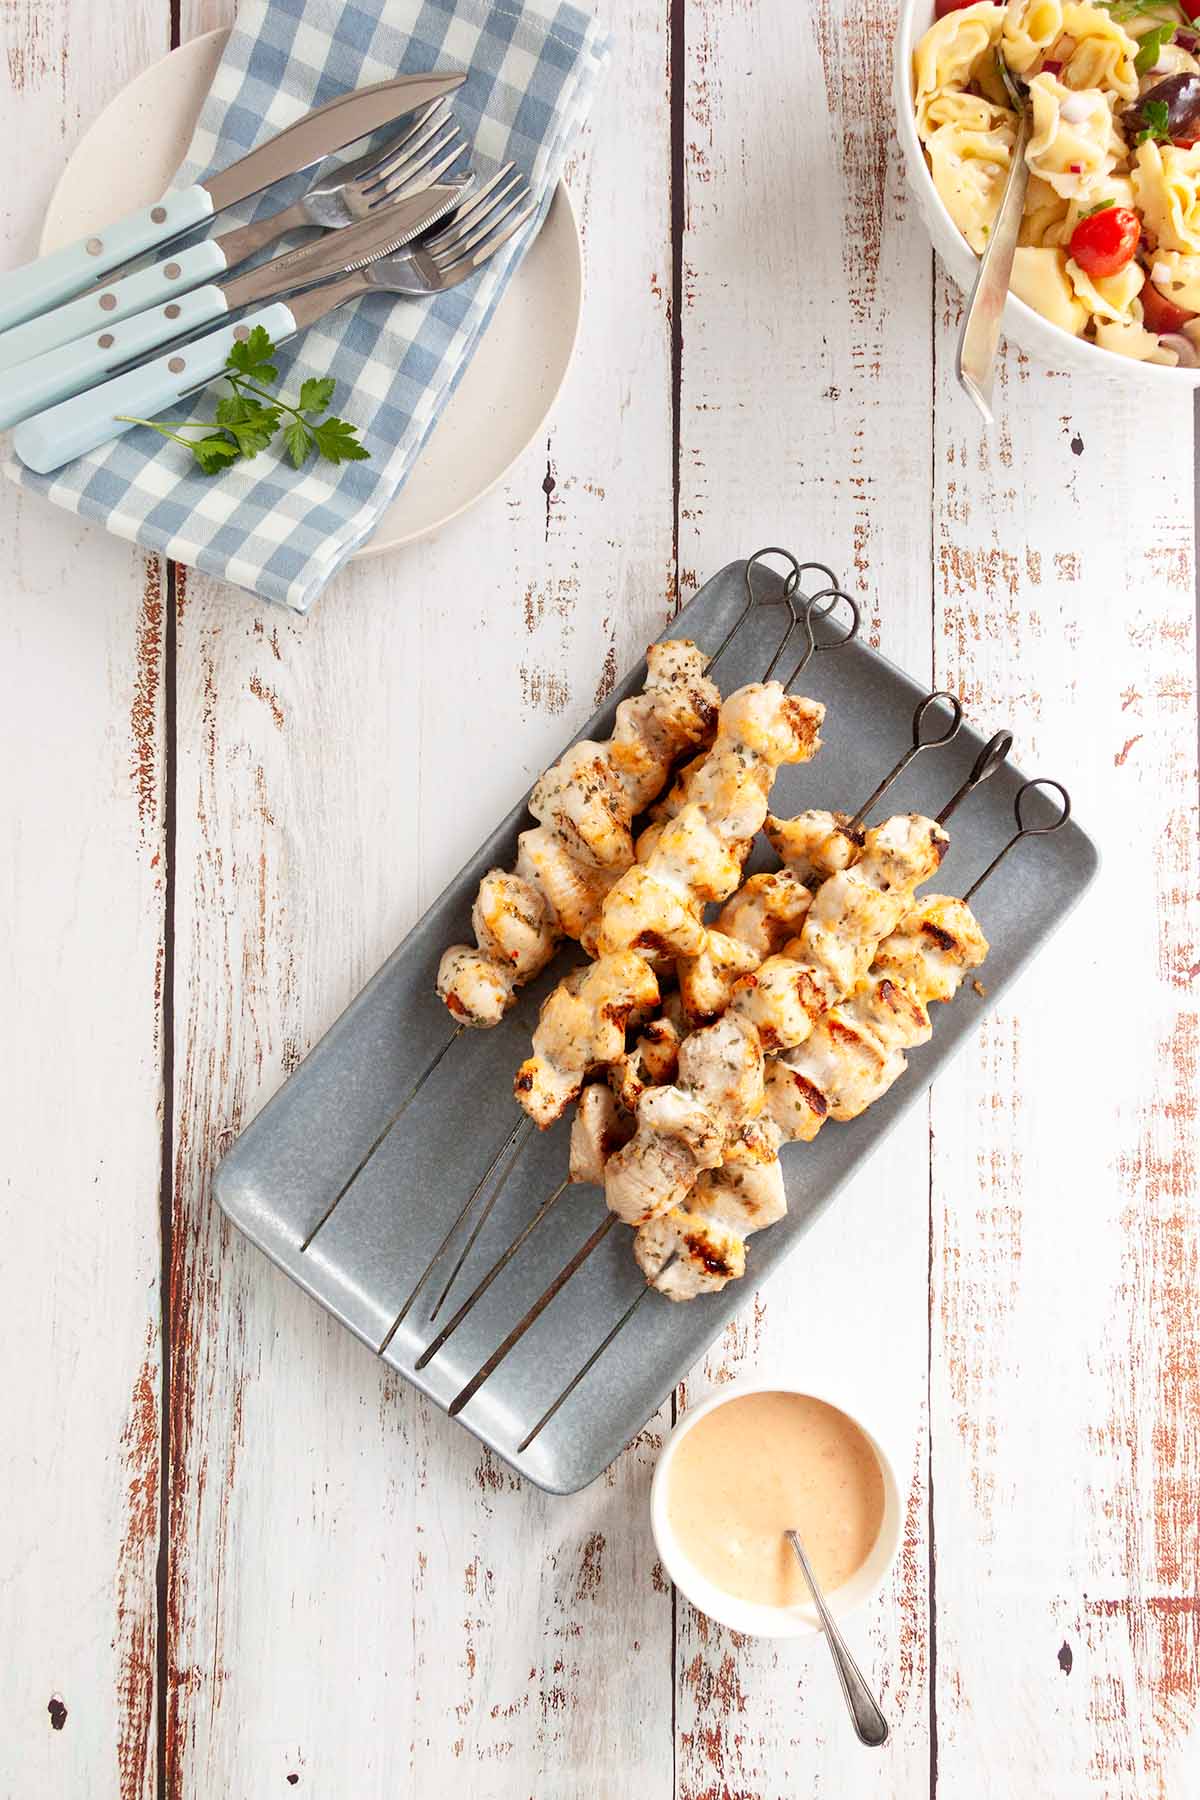 Grilled chicken skewers served on a modern slate tray with creamy sauce on the side and a fresh pasta salad in the background, ready for a delightful meal.